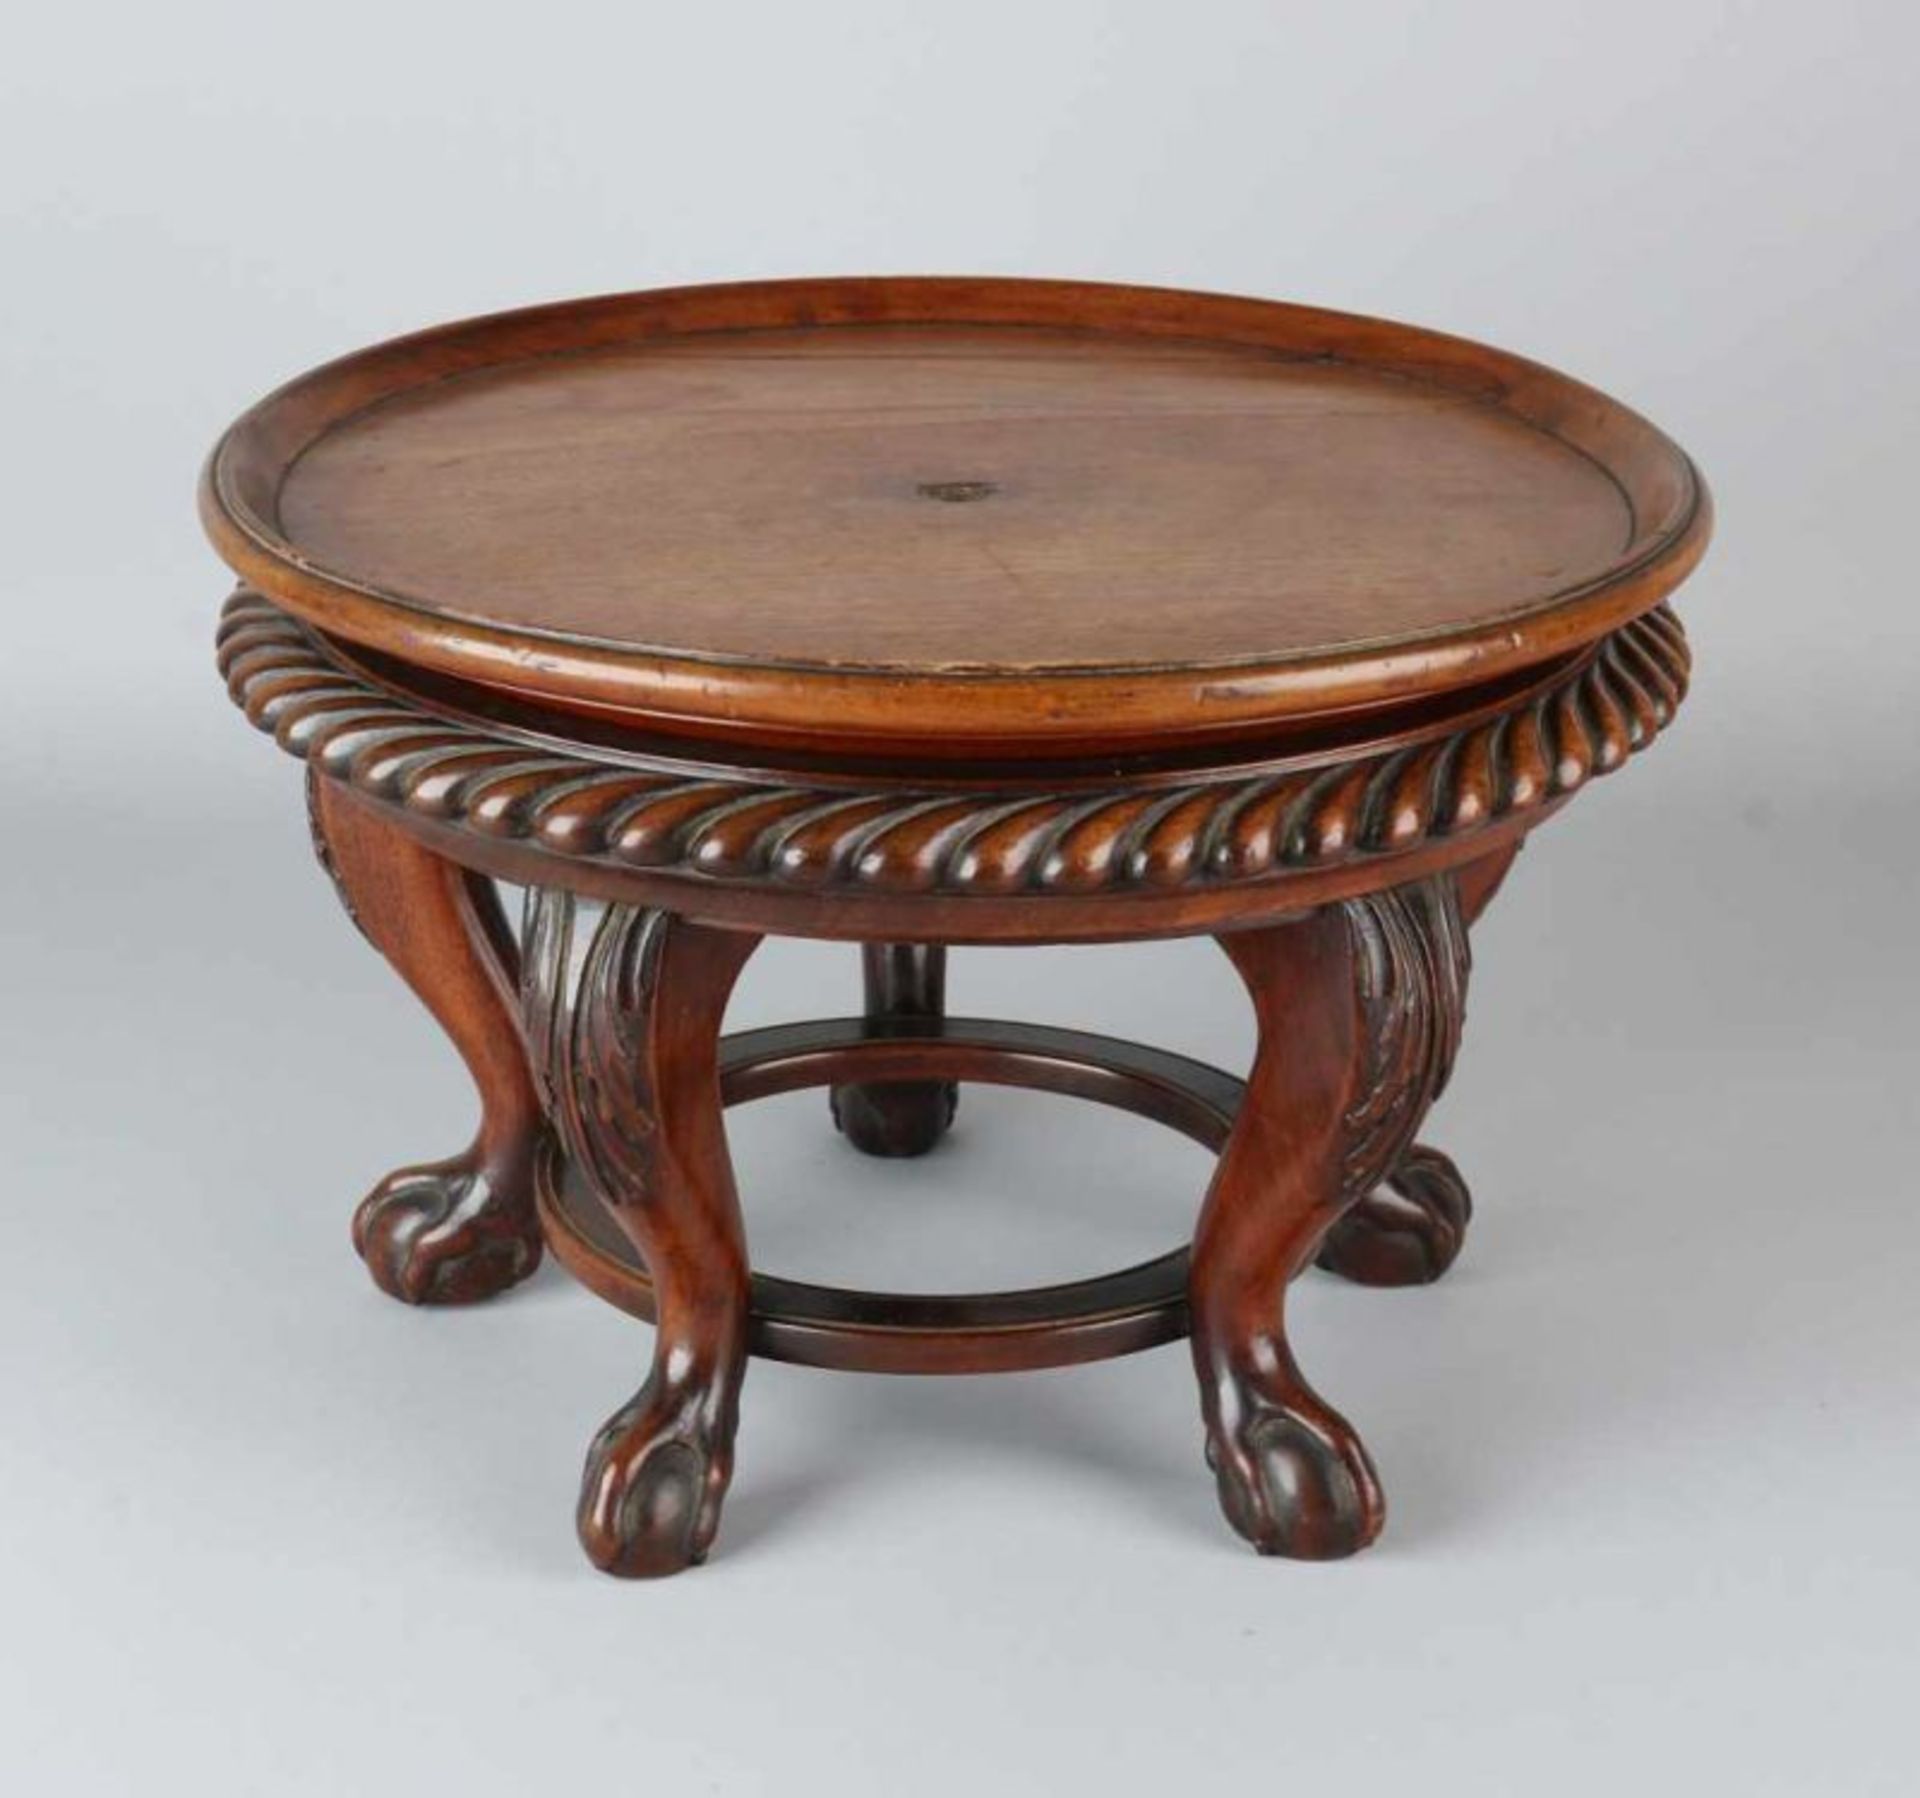 Antique hardwood Chinese pedestal for vase. With claw feet. Circa 1900. Dimensions: 22 - ø 32 cm. In